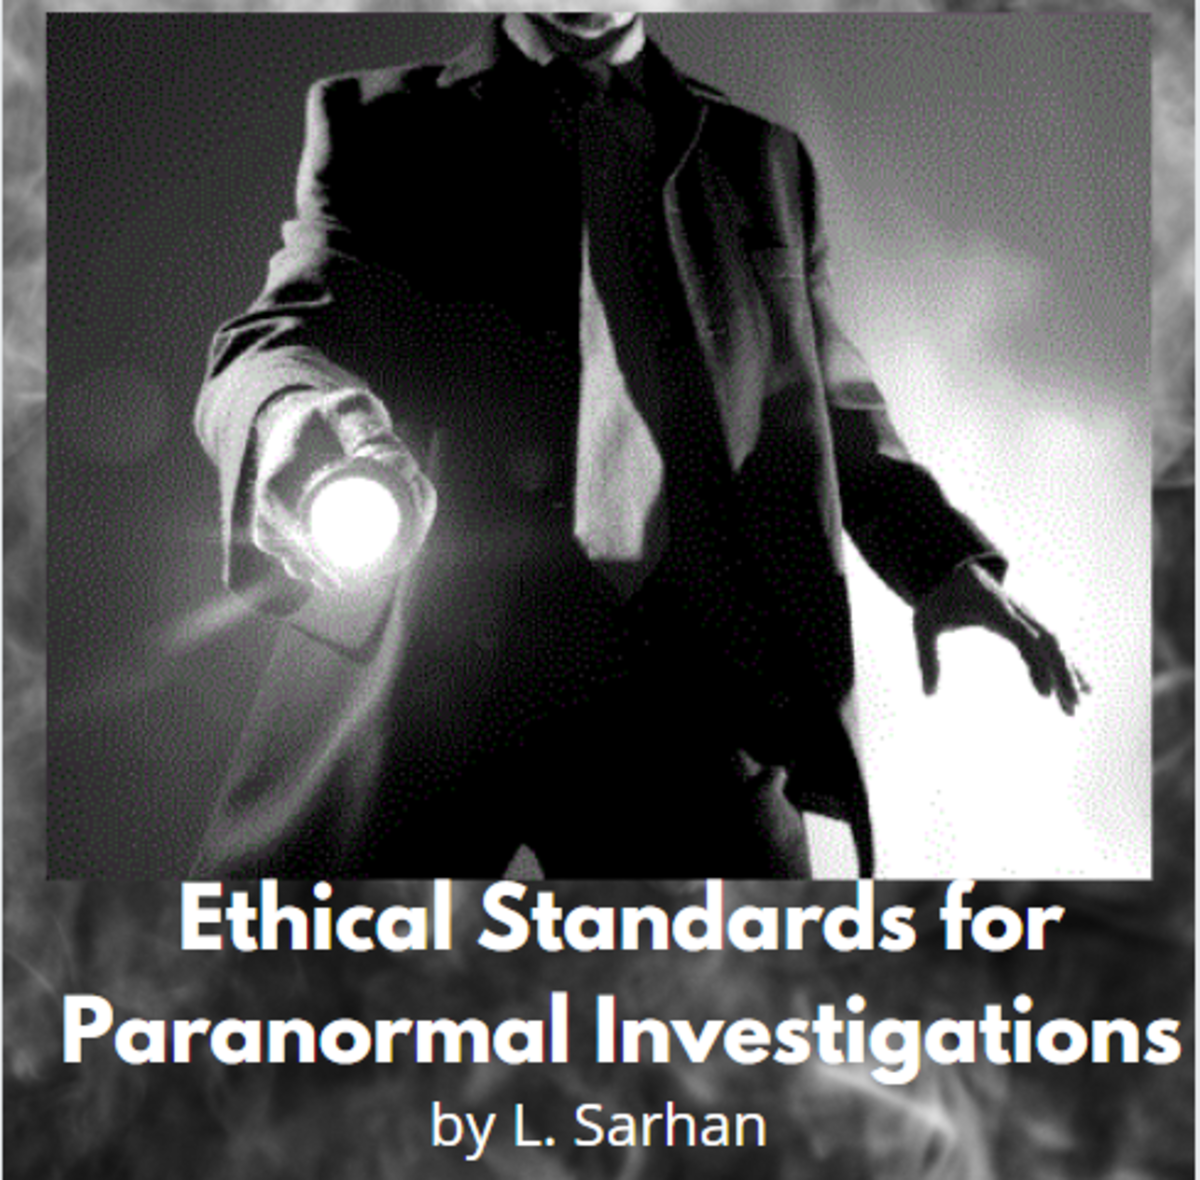 An interest in the paranormal is on the rise and so are the number of paranormal investigators. Learn about some basic ethical standards for paranormal investigating.